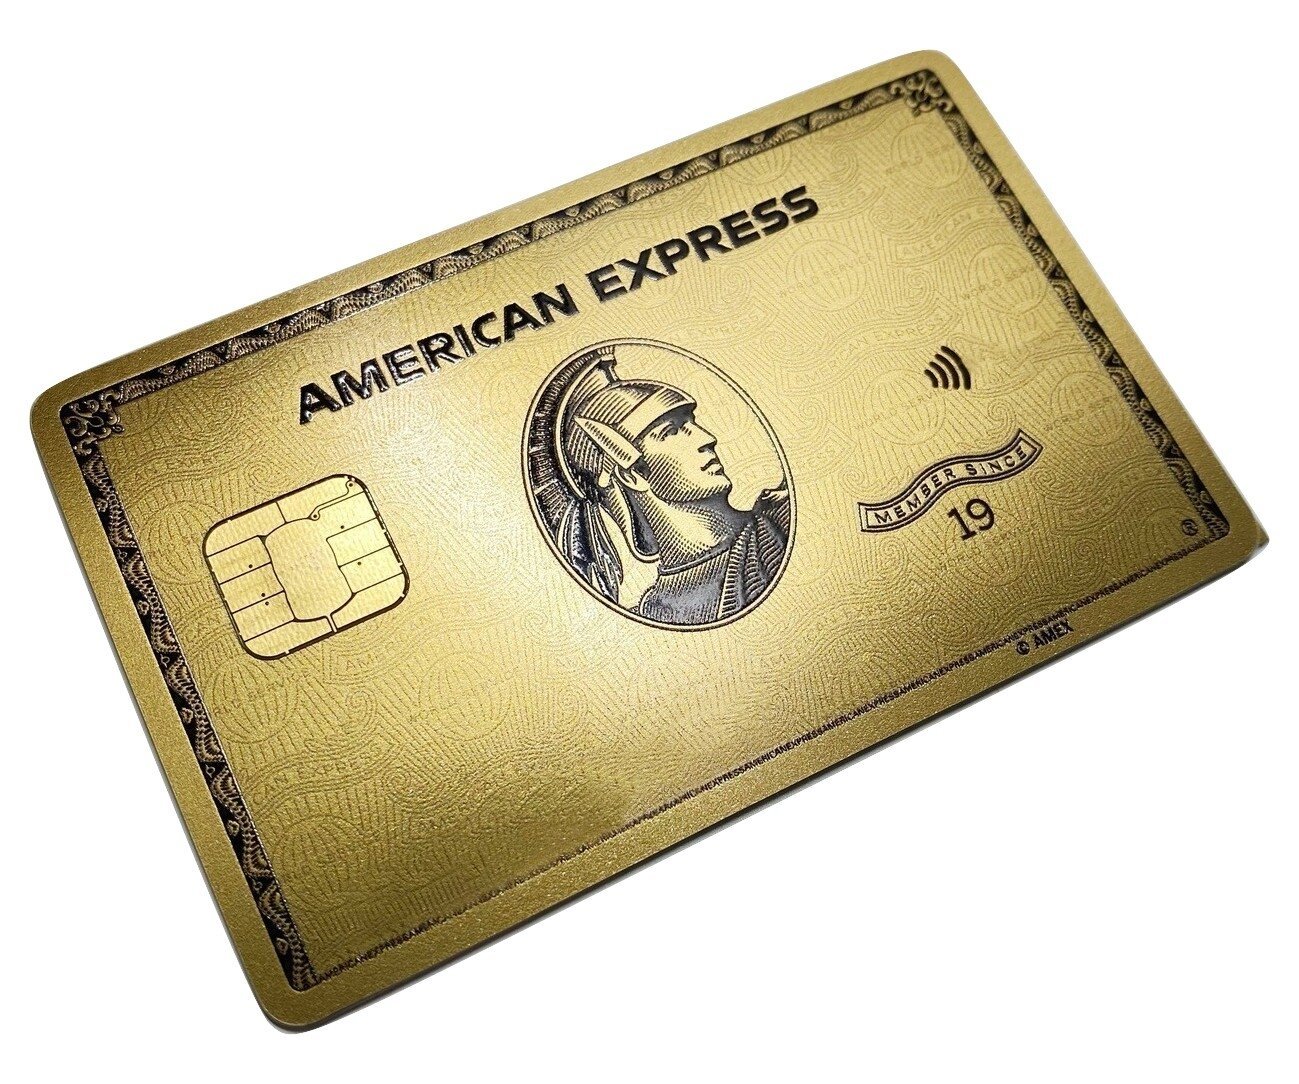 american express gold card